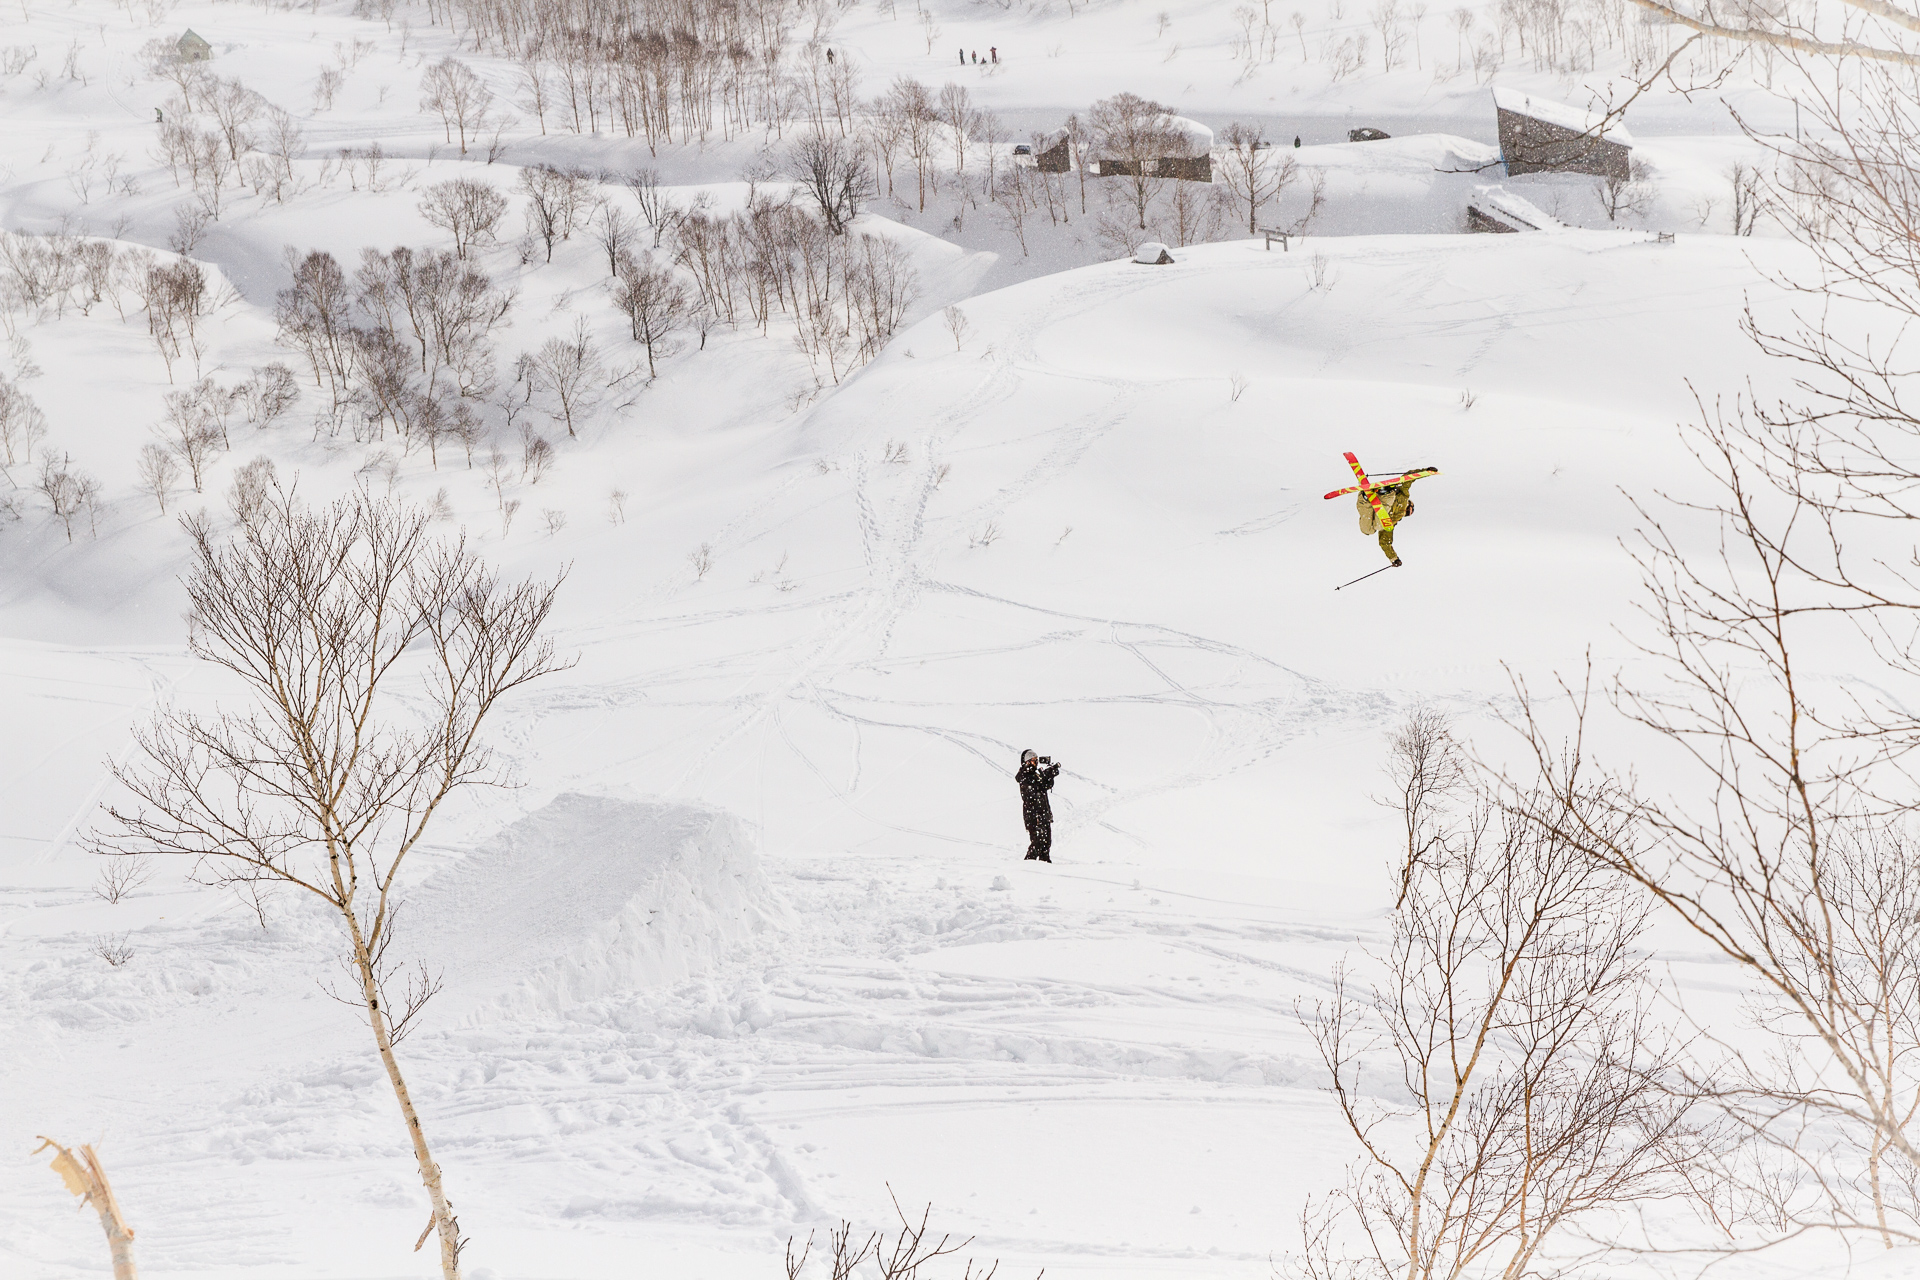 Jonah Williams floats a rodeo 7 blunt in the Niseko backcountry.